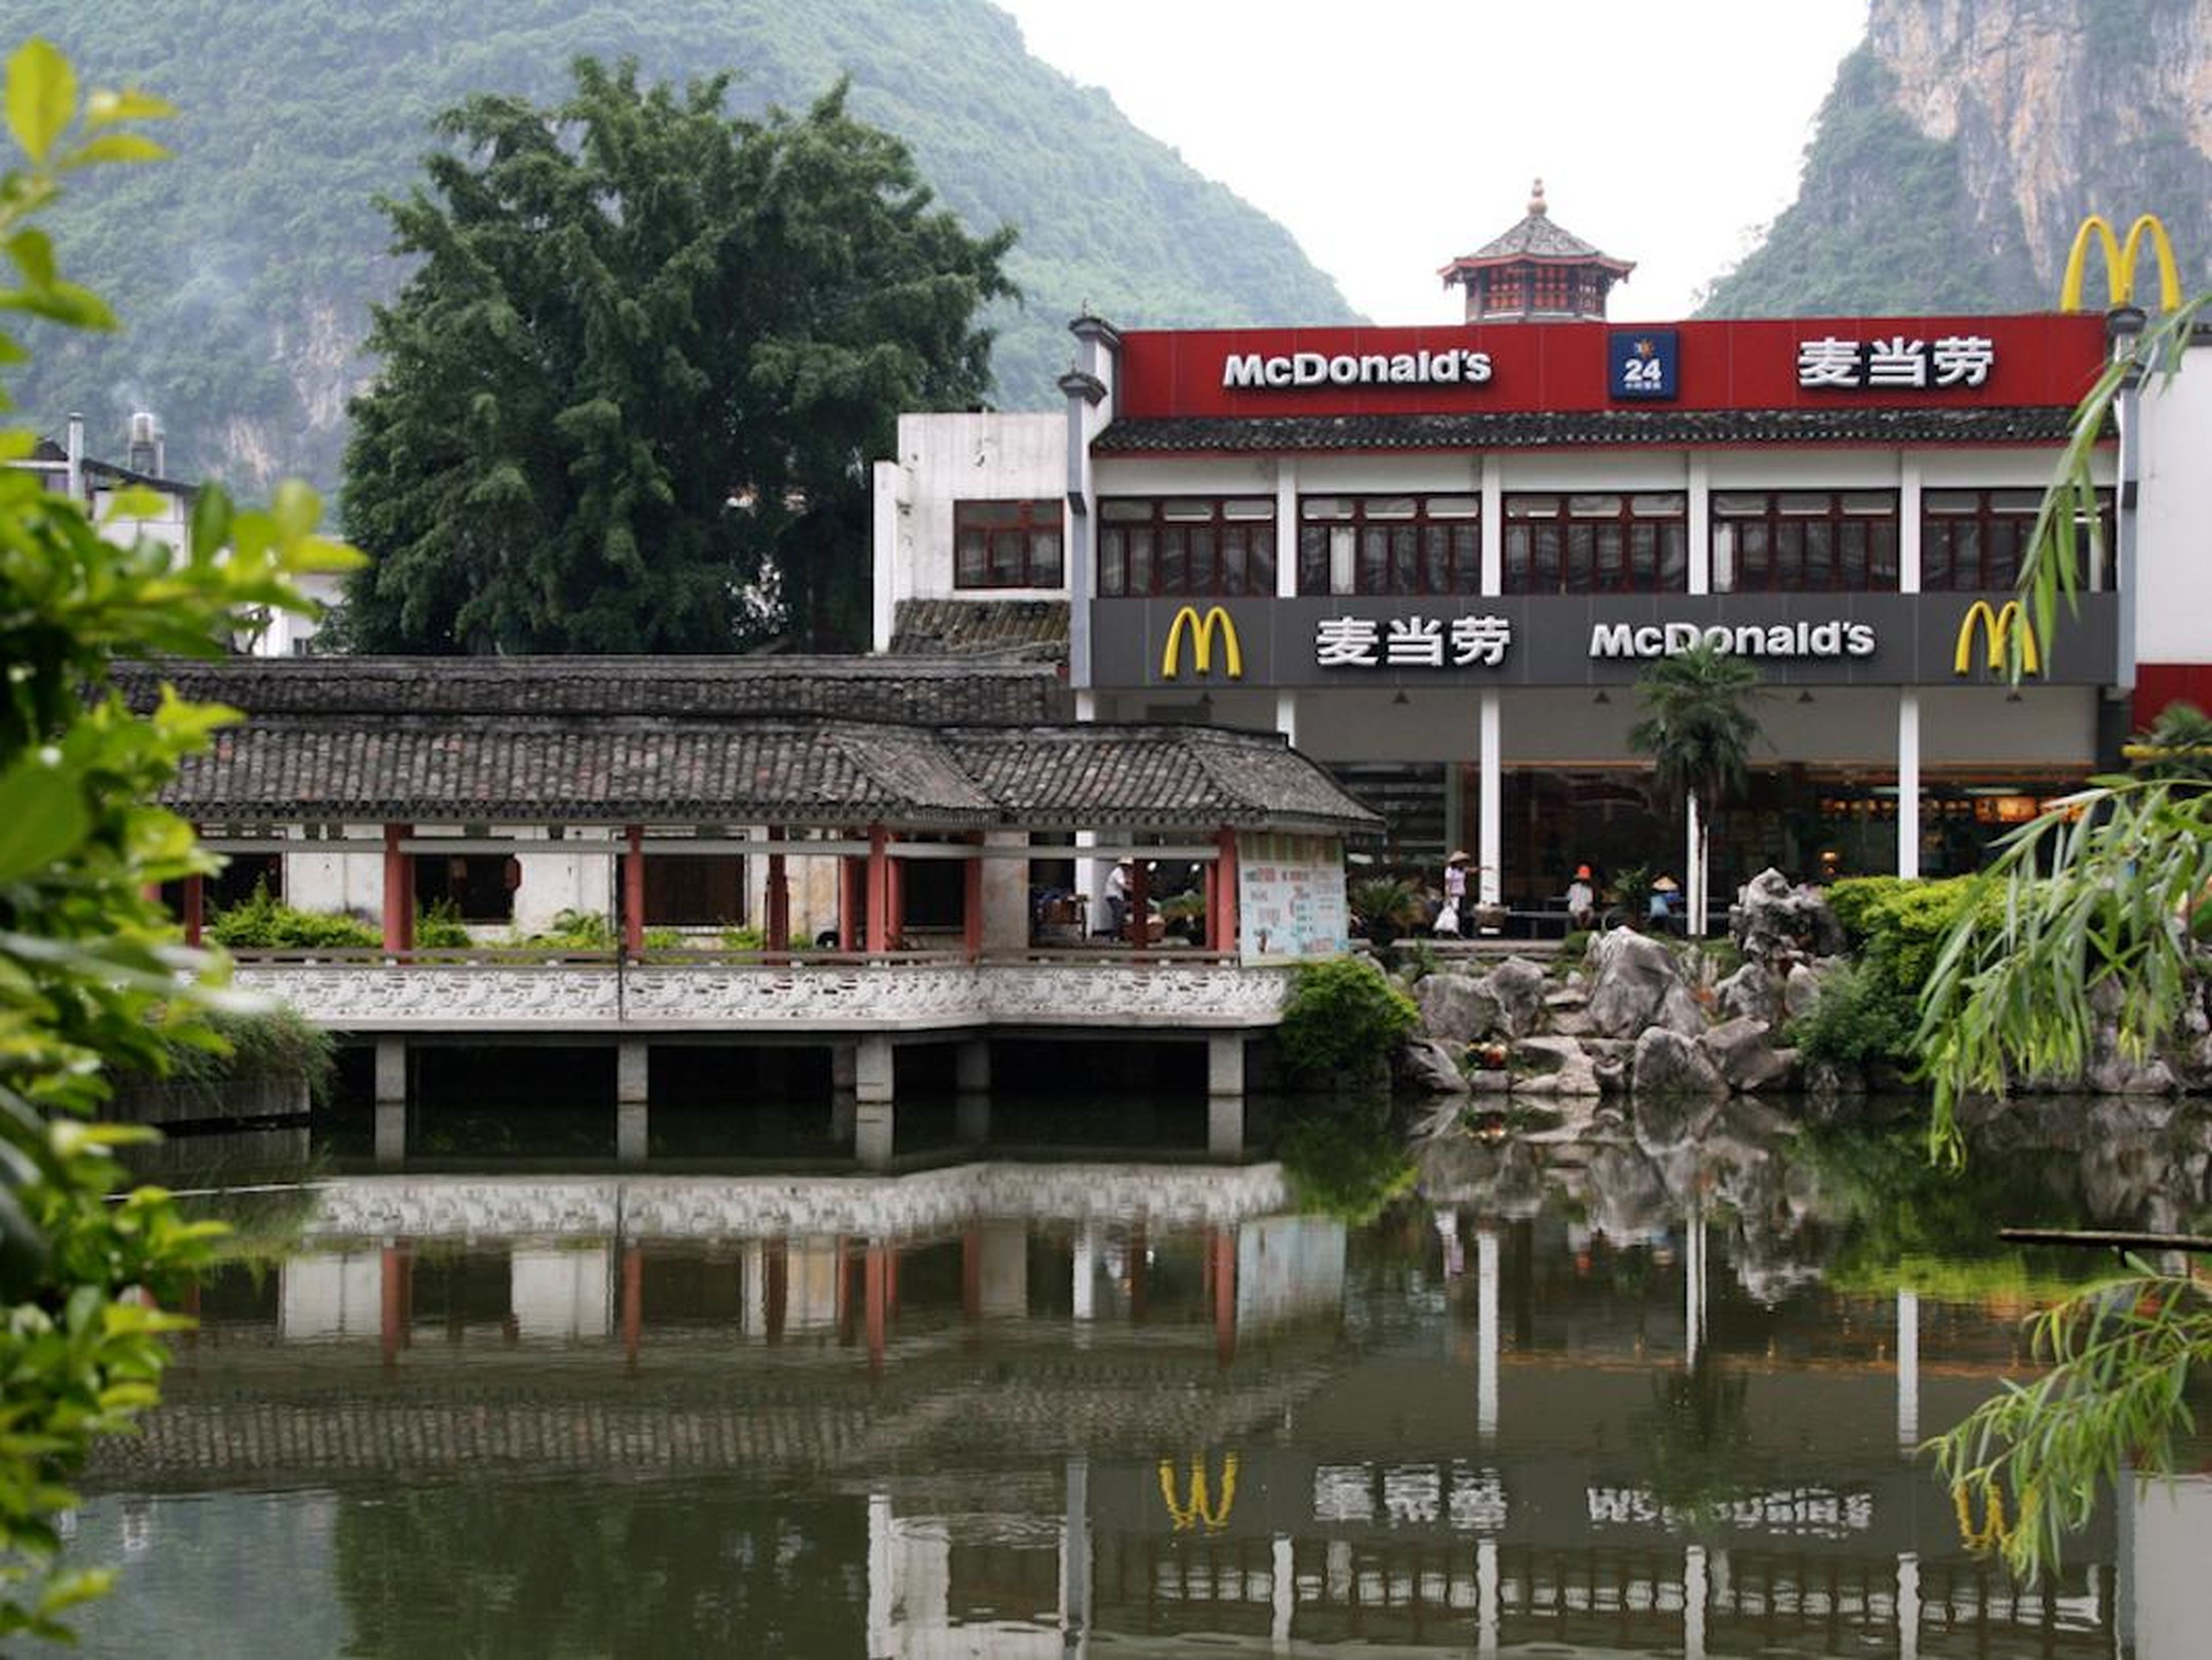 In Yangshuo, China, a McDonald's sits in a pagoda at the base of mountains and has beautiful water views.